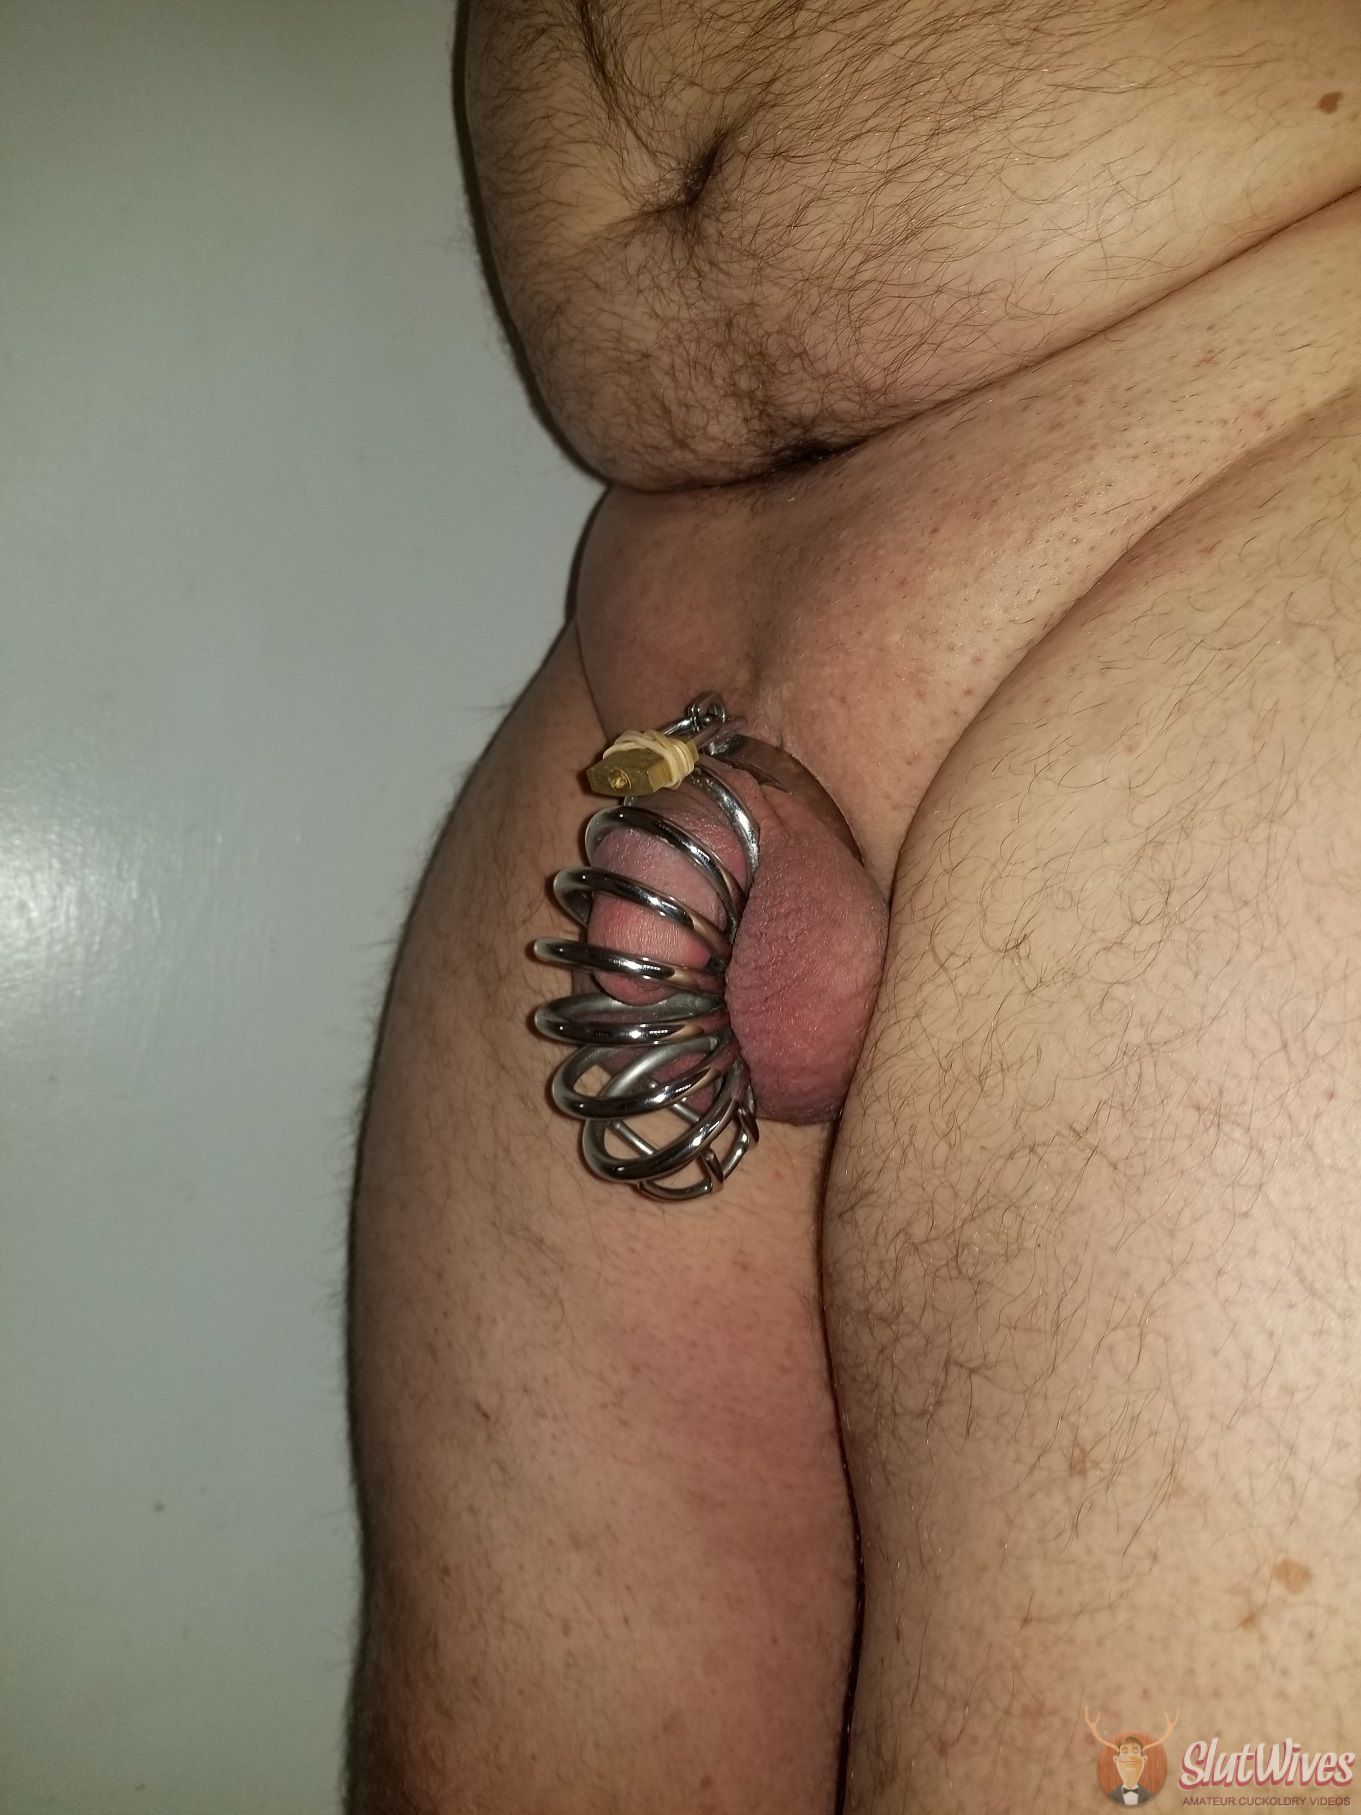 Caged Clit